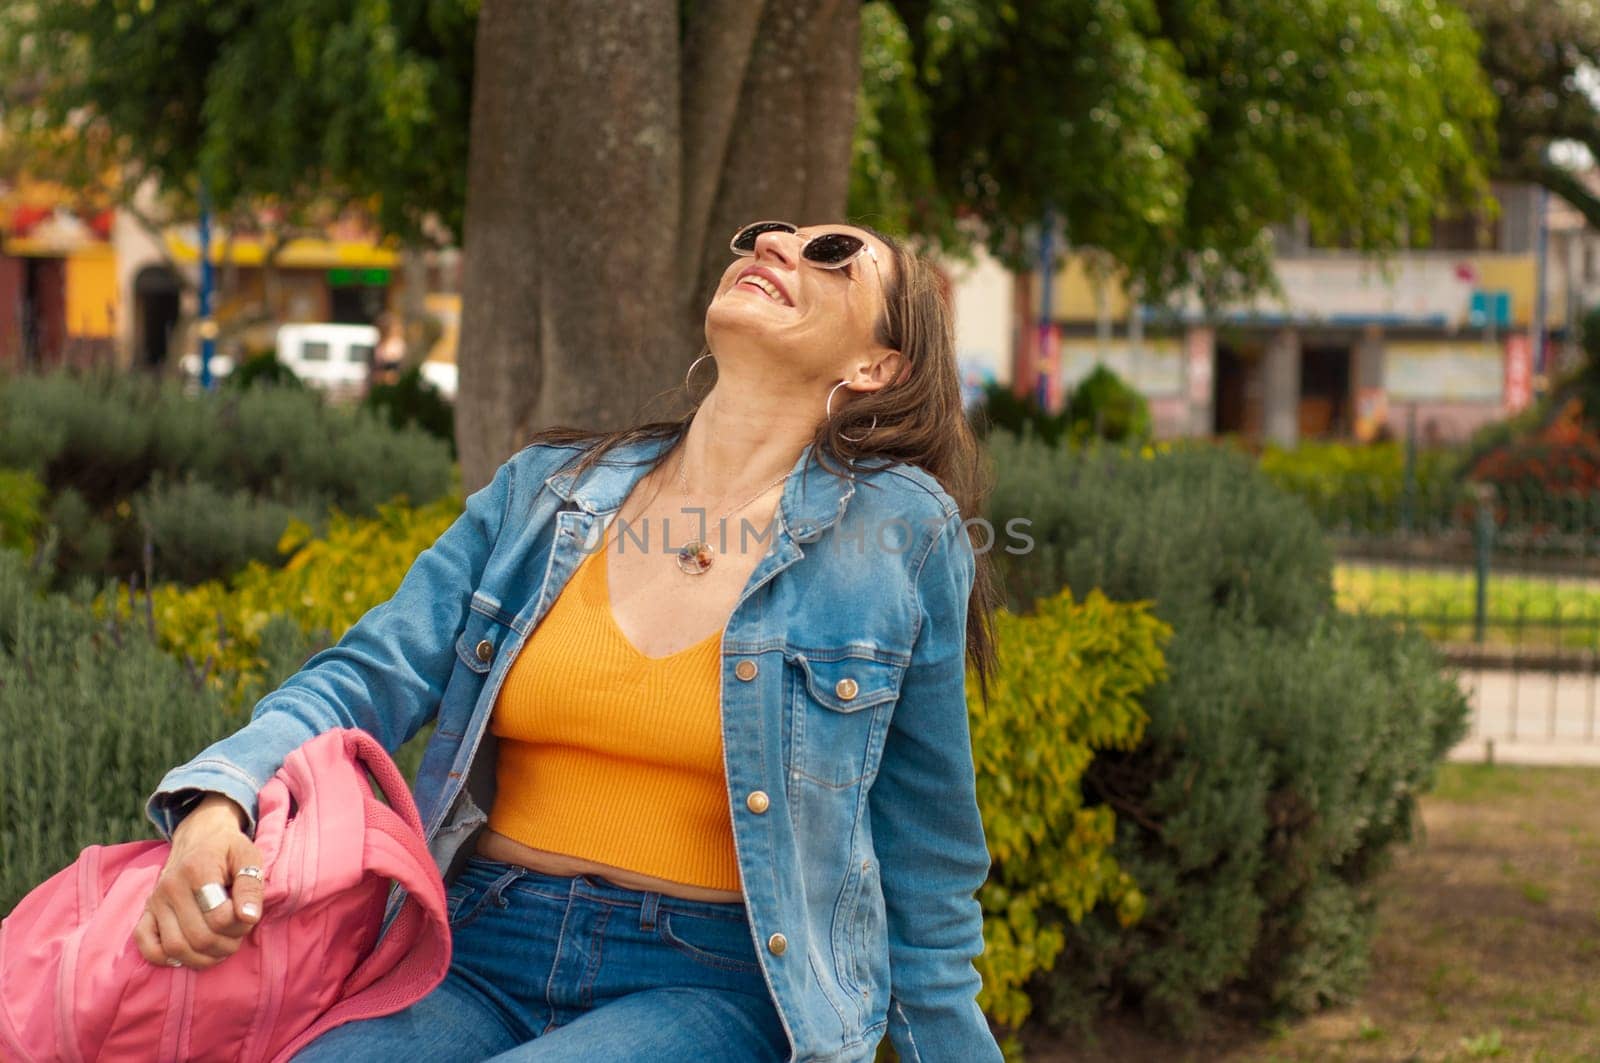 A woman, wearing jeans and a denim jacket, sits under a tree in the park, appearing cool and relaxed.